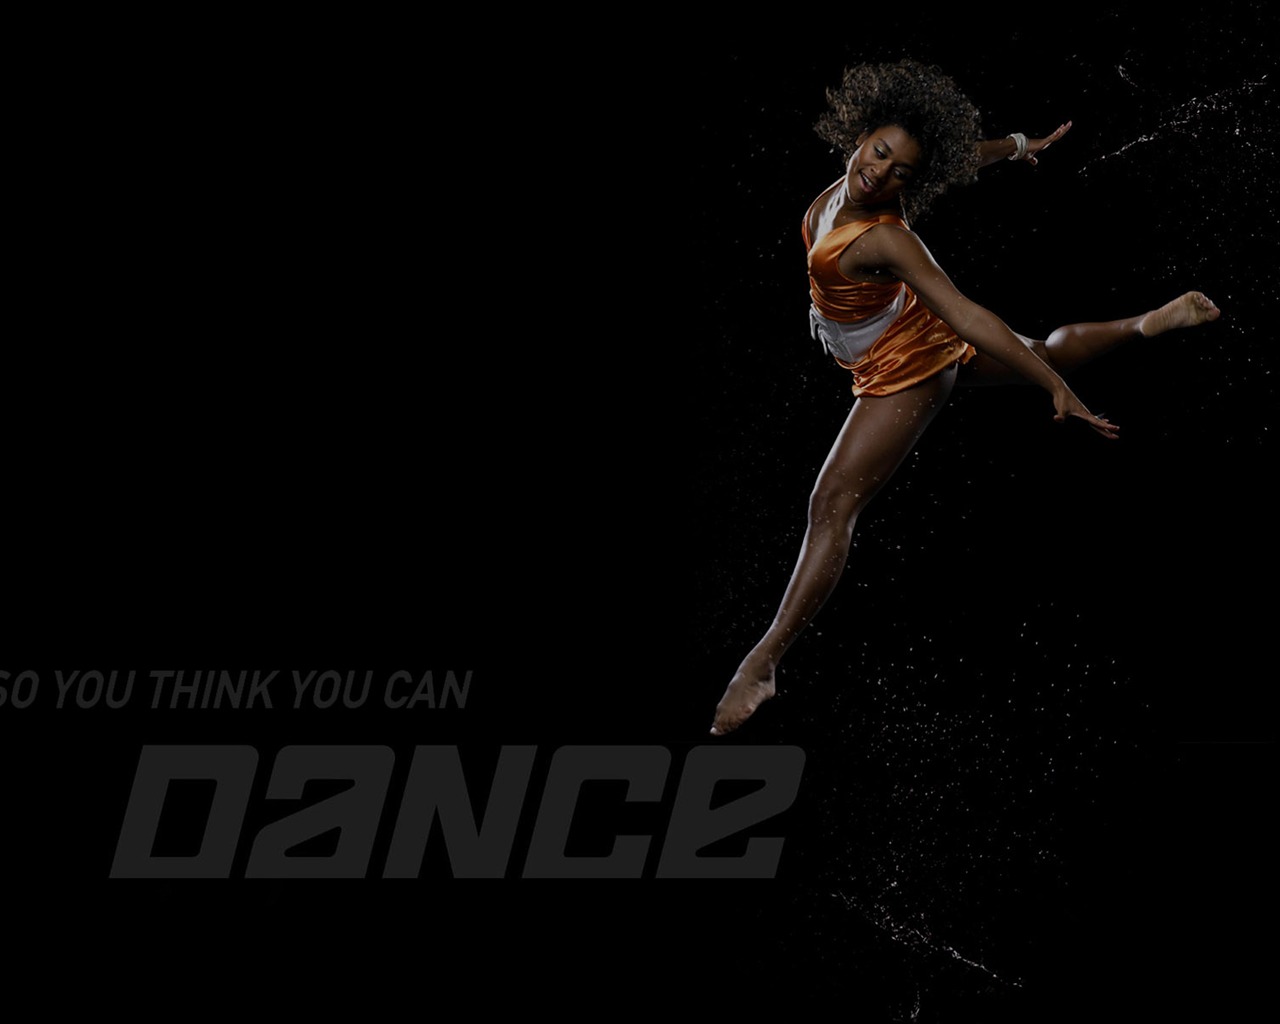 So You Think You Can Dance 舞林爭霸壁紙(二) #7 - 1280x1024